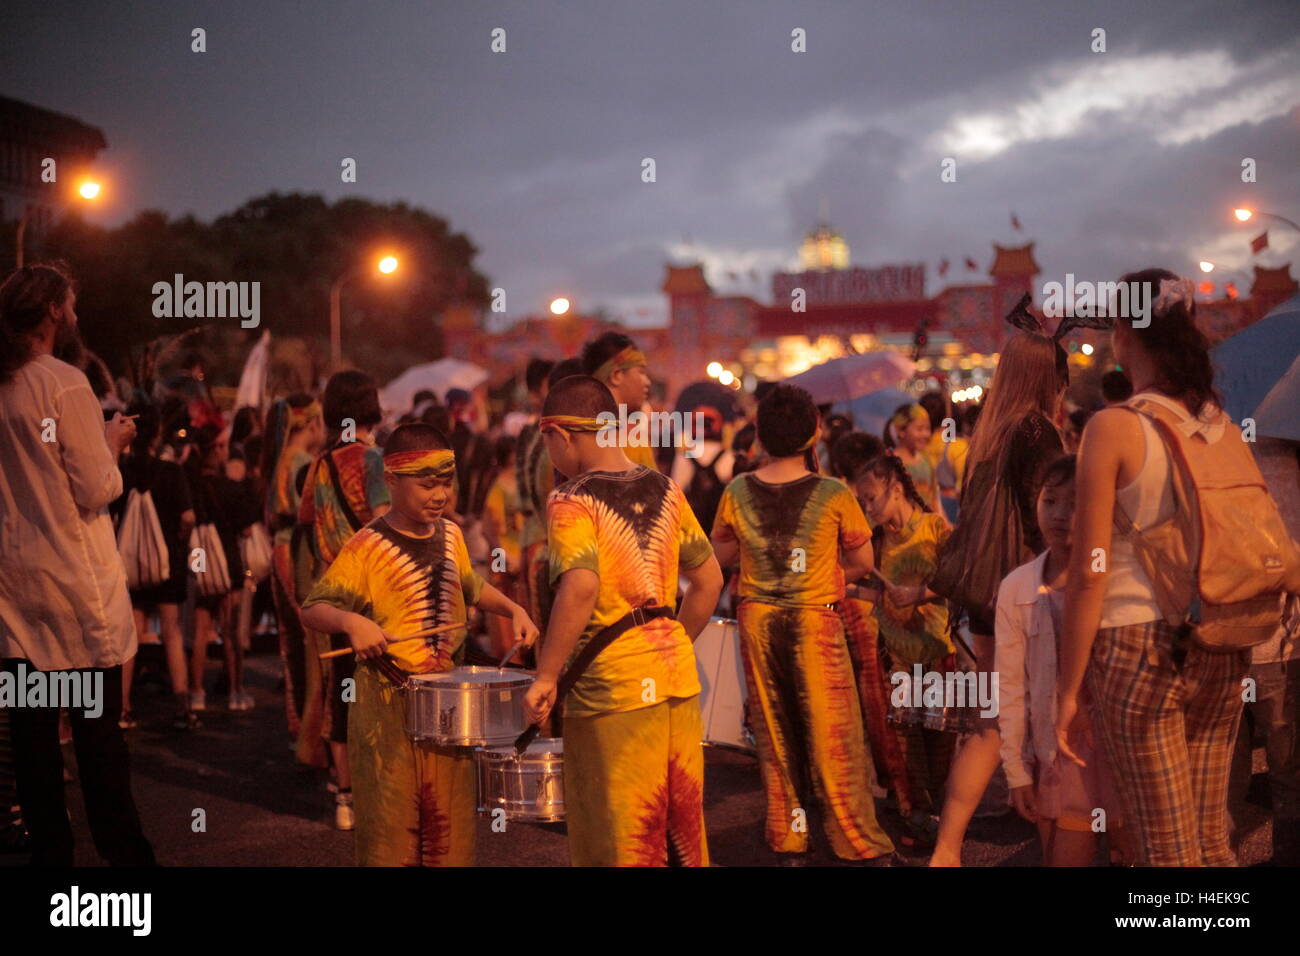 Taipei City, Taiwan. 15th Oct, 2016. Thousands of Dream Parade participants gathered to rock areas near Liberty Square and Presidential Palace. No matter young or old, people brought art works, danced, did Samba drumming and had fun. The annual event was initiated by a community which aims to increase emotional bond among neighbors by collaborative arts and self-expression. Many influenced remote aboriginal tribes also participated. Credit:  Yunjie Liao/Pacific Press/Alamy Live News Stock Photo